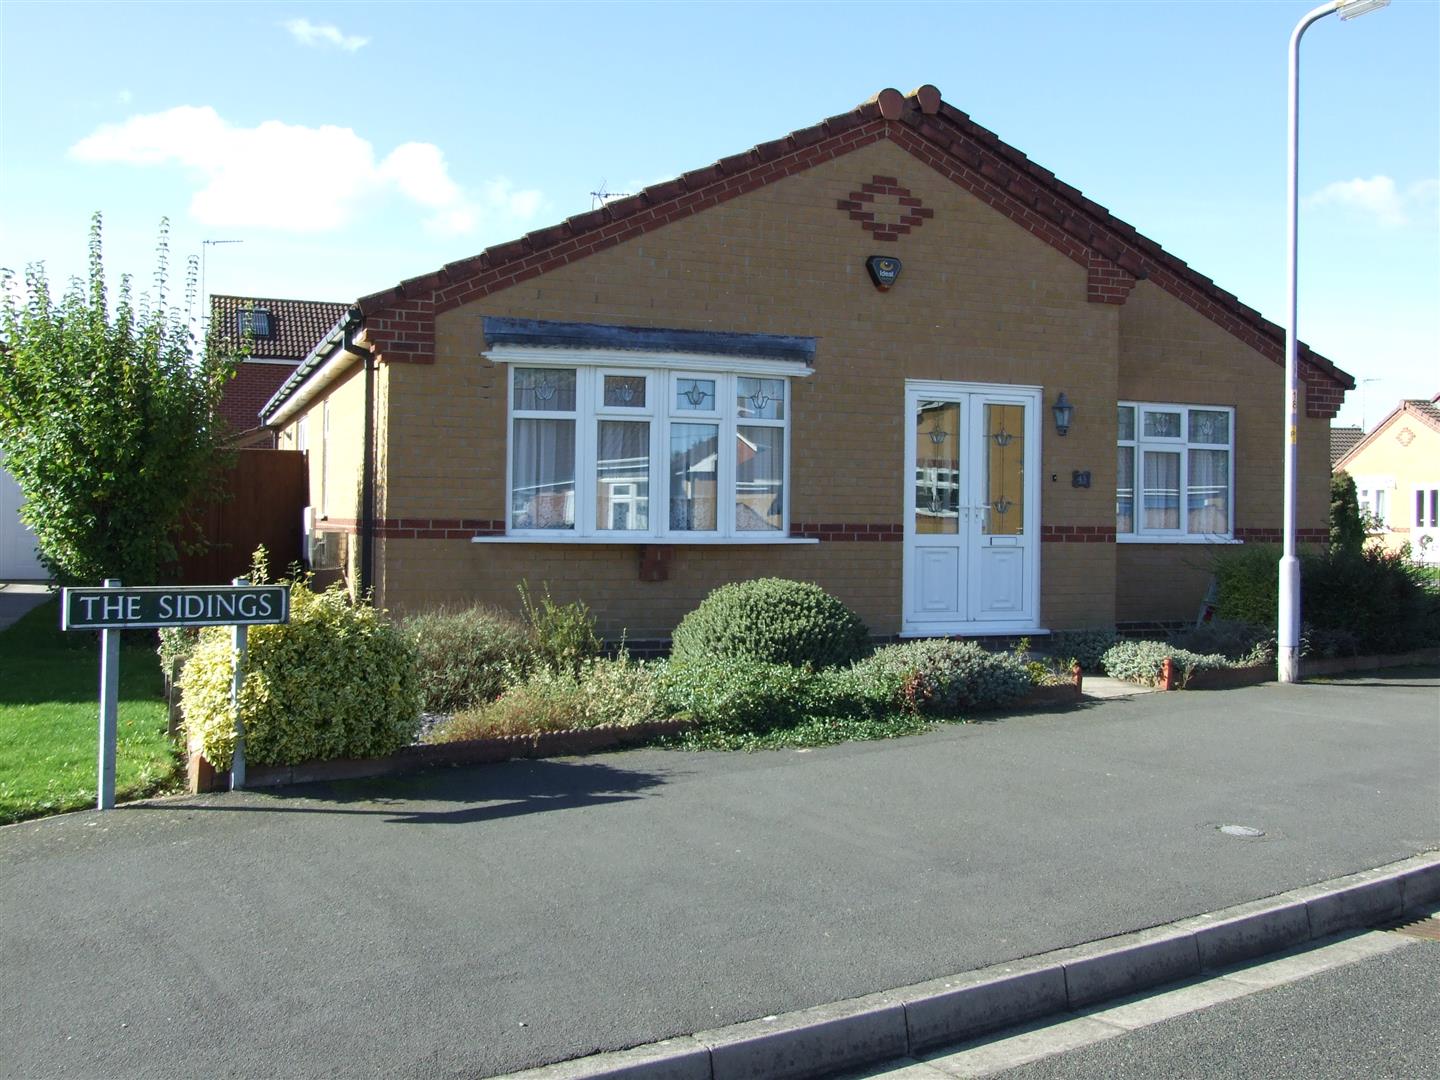 3 bed detached bungalow to rent - Property Image 1